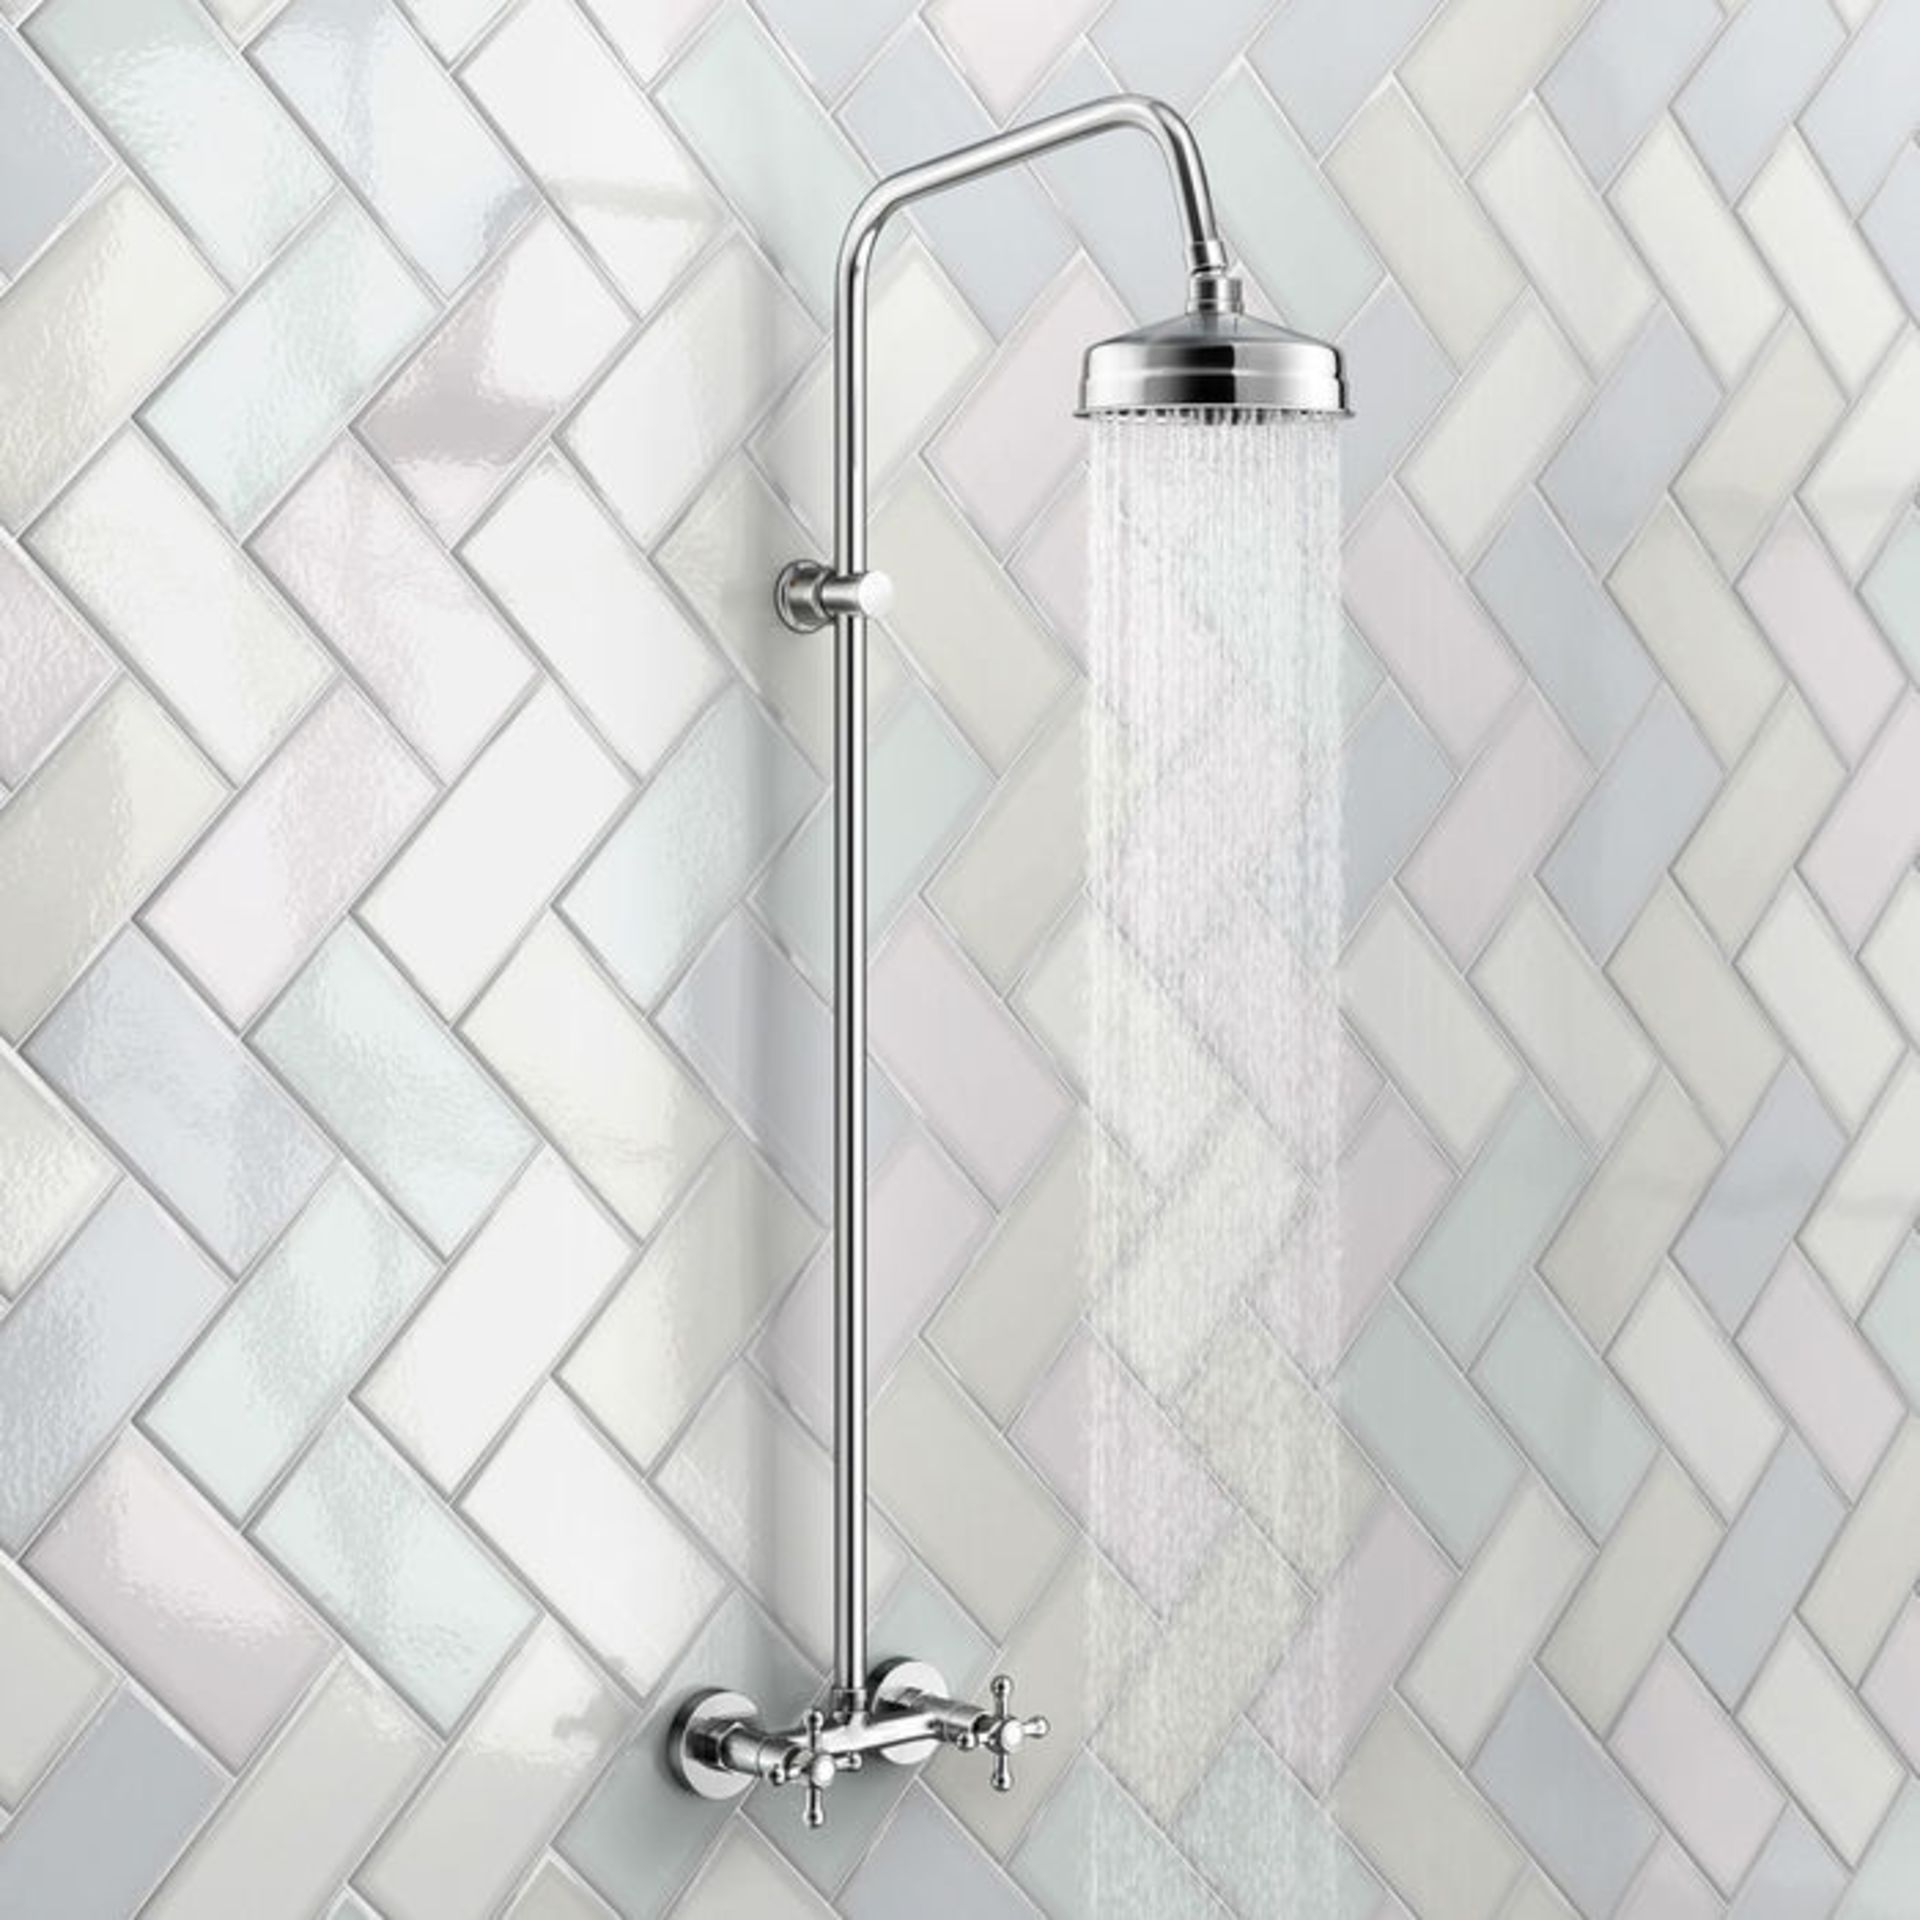 (P90) Traditional Exposed Shower Medium Head Exposed design makes for a statement piece Stunning